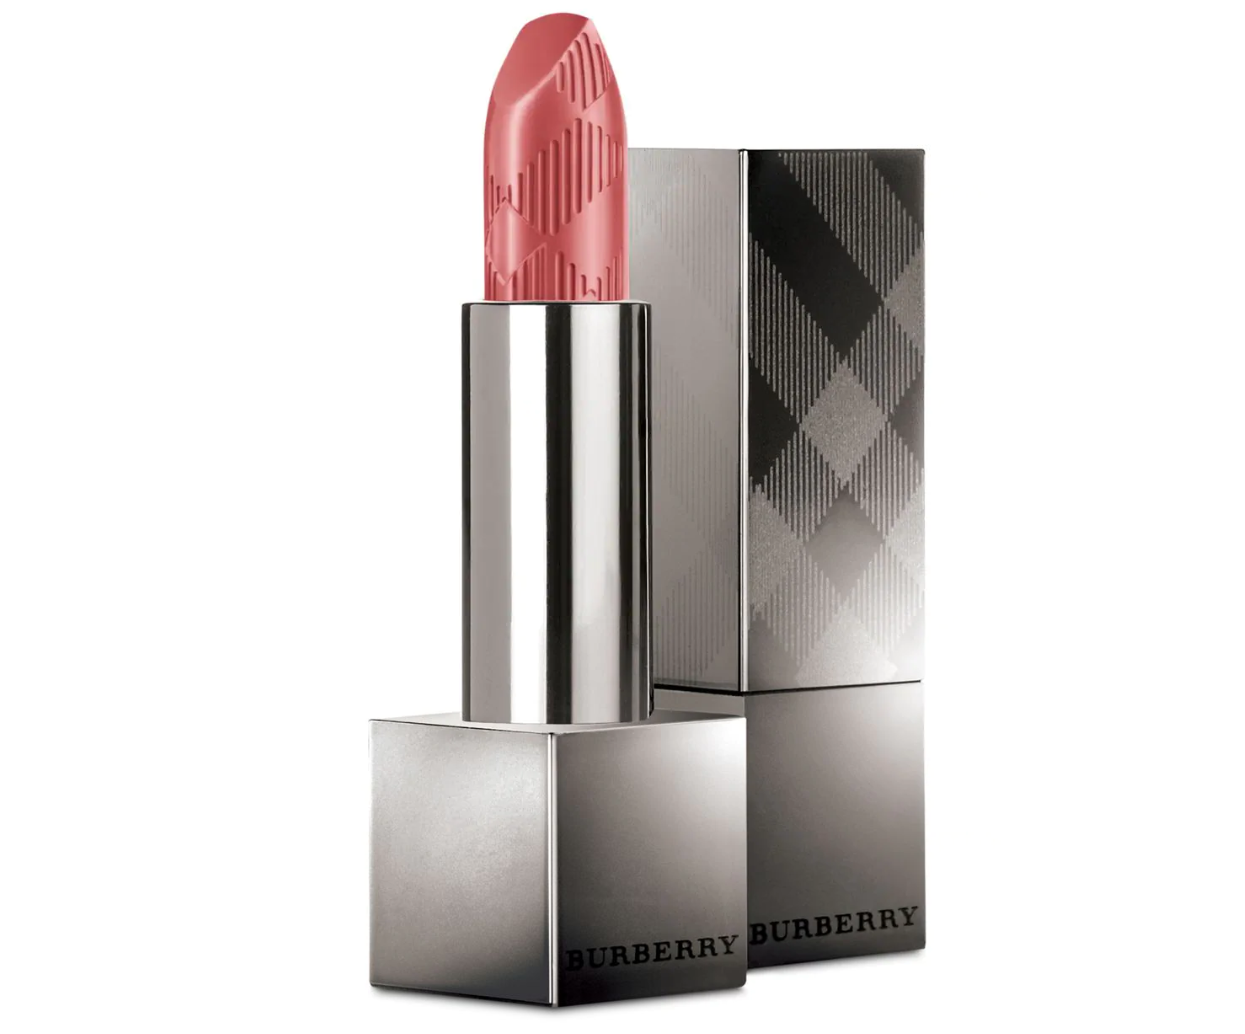 Burberry Beauty gift with purchase 2 - Burberry Beauty gift with purchase 2021